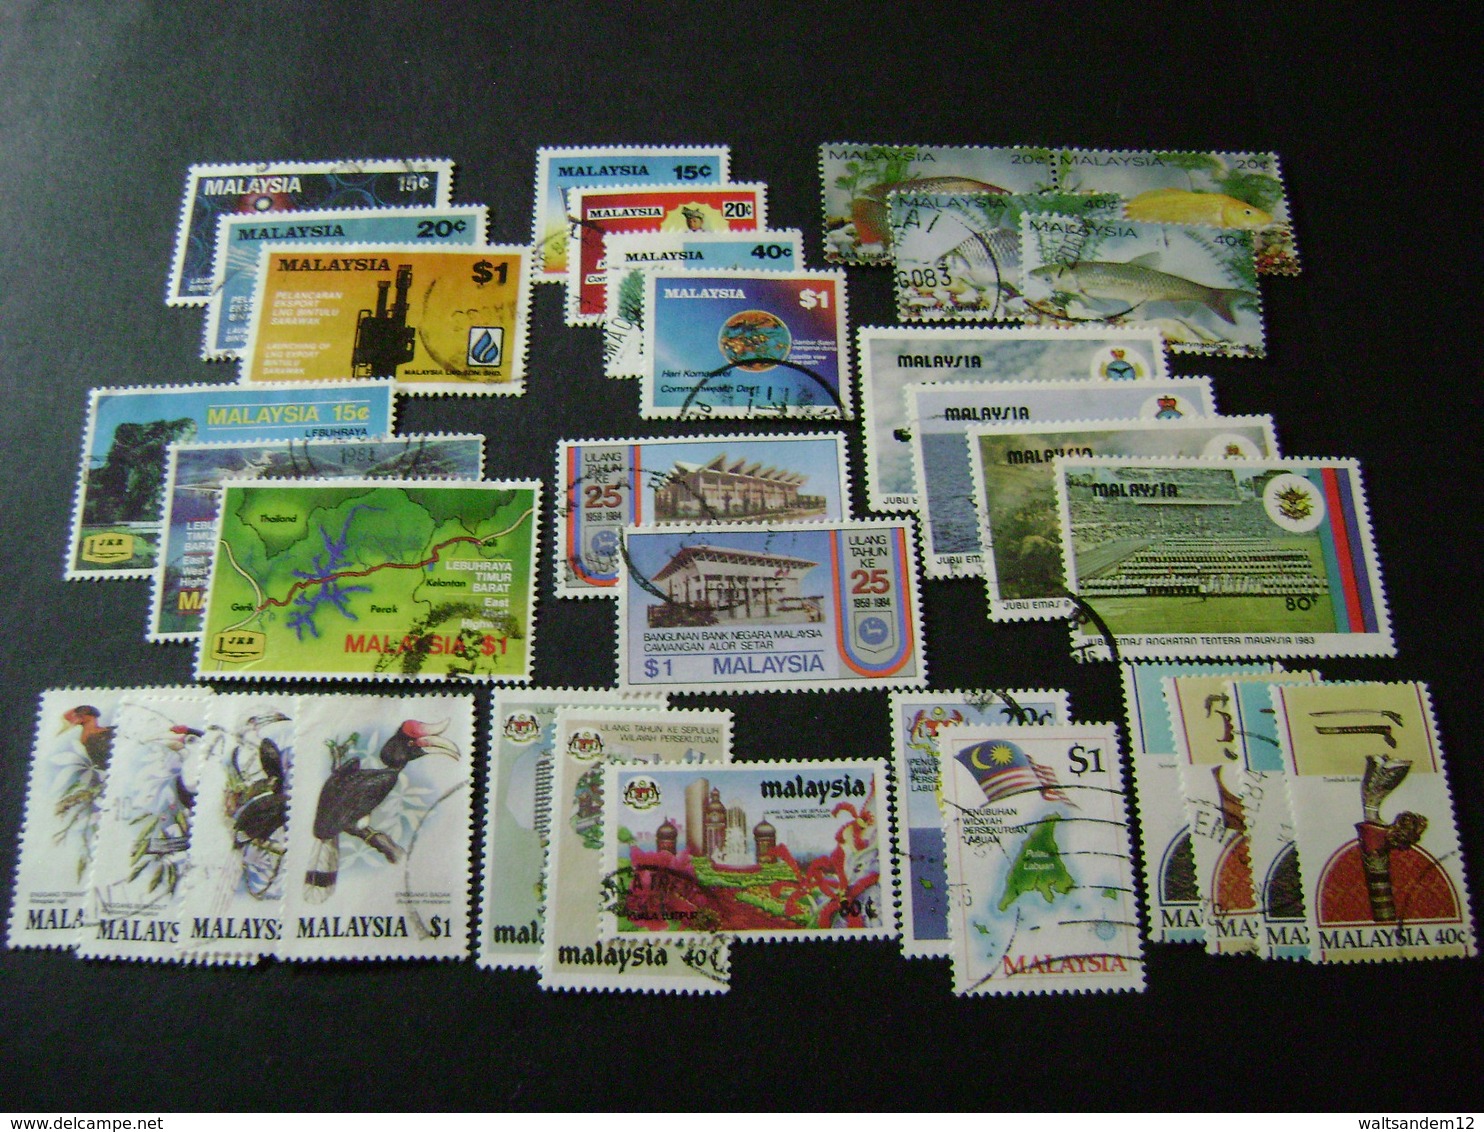 Malaysia 1983-1985 Complete Stamp Issues (SG 253-270, 280-330) 2 Images - Used - Malaysia (1964-...)